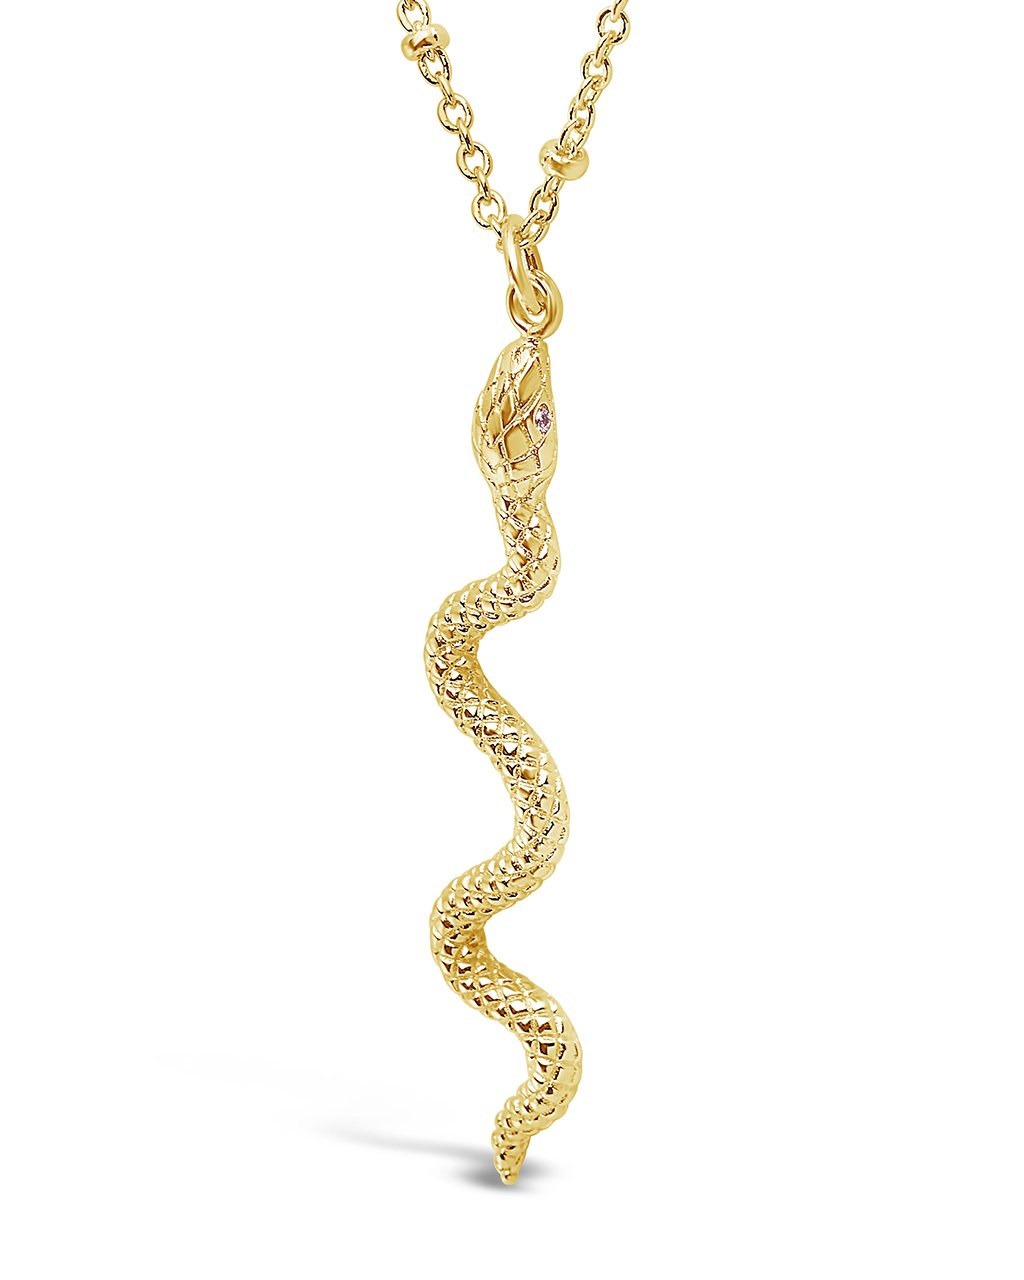 Scaly Snake Pendant Necklace - Sterling Forever